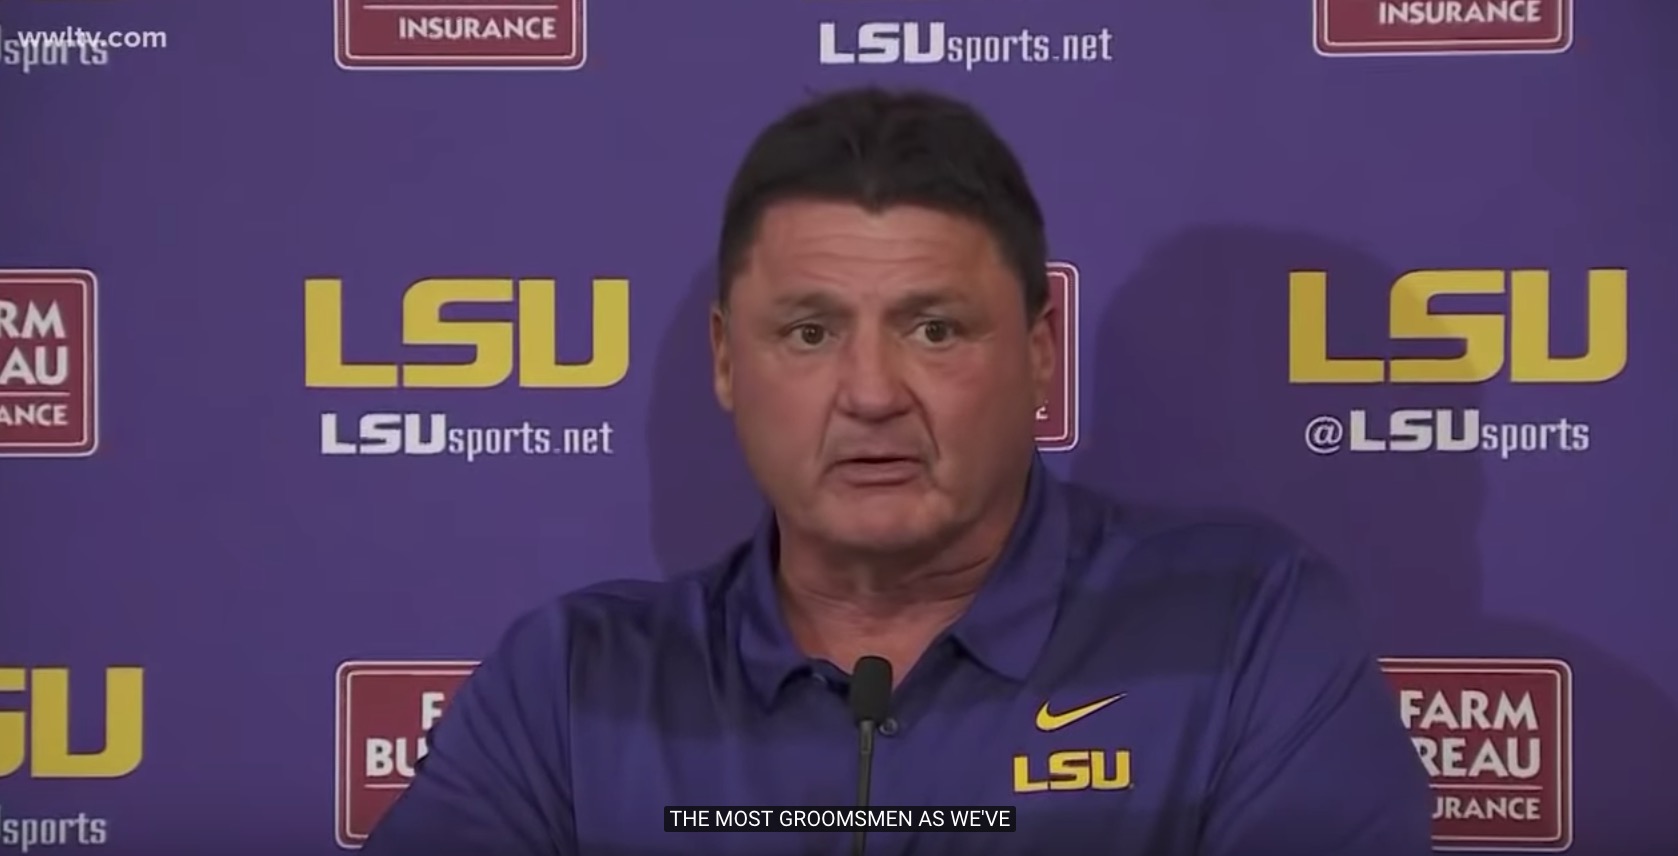 Closed captioning was no match for Ed Orgeron’s press conference